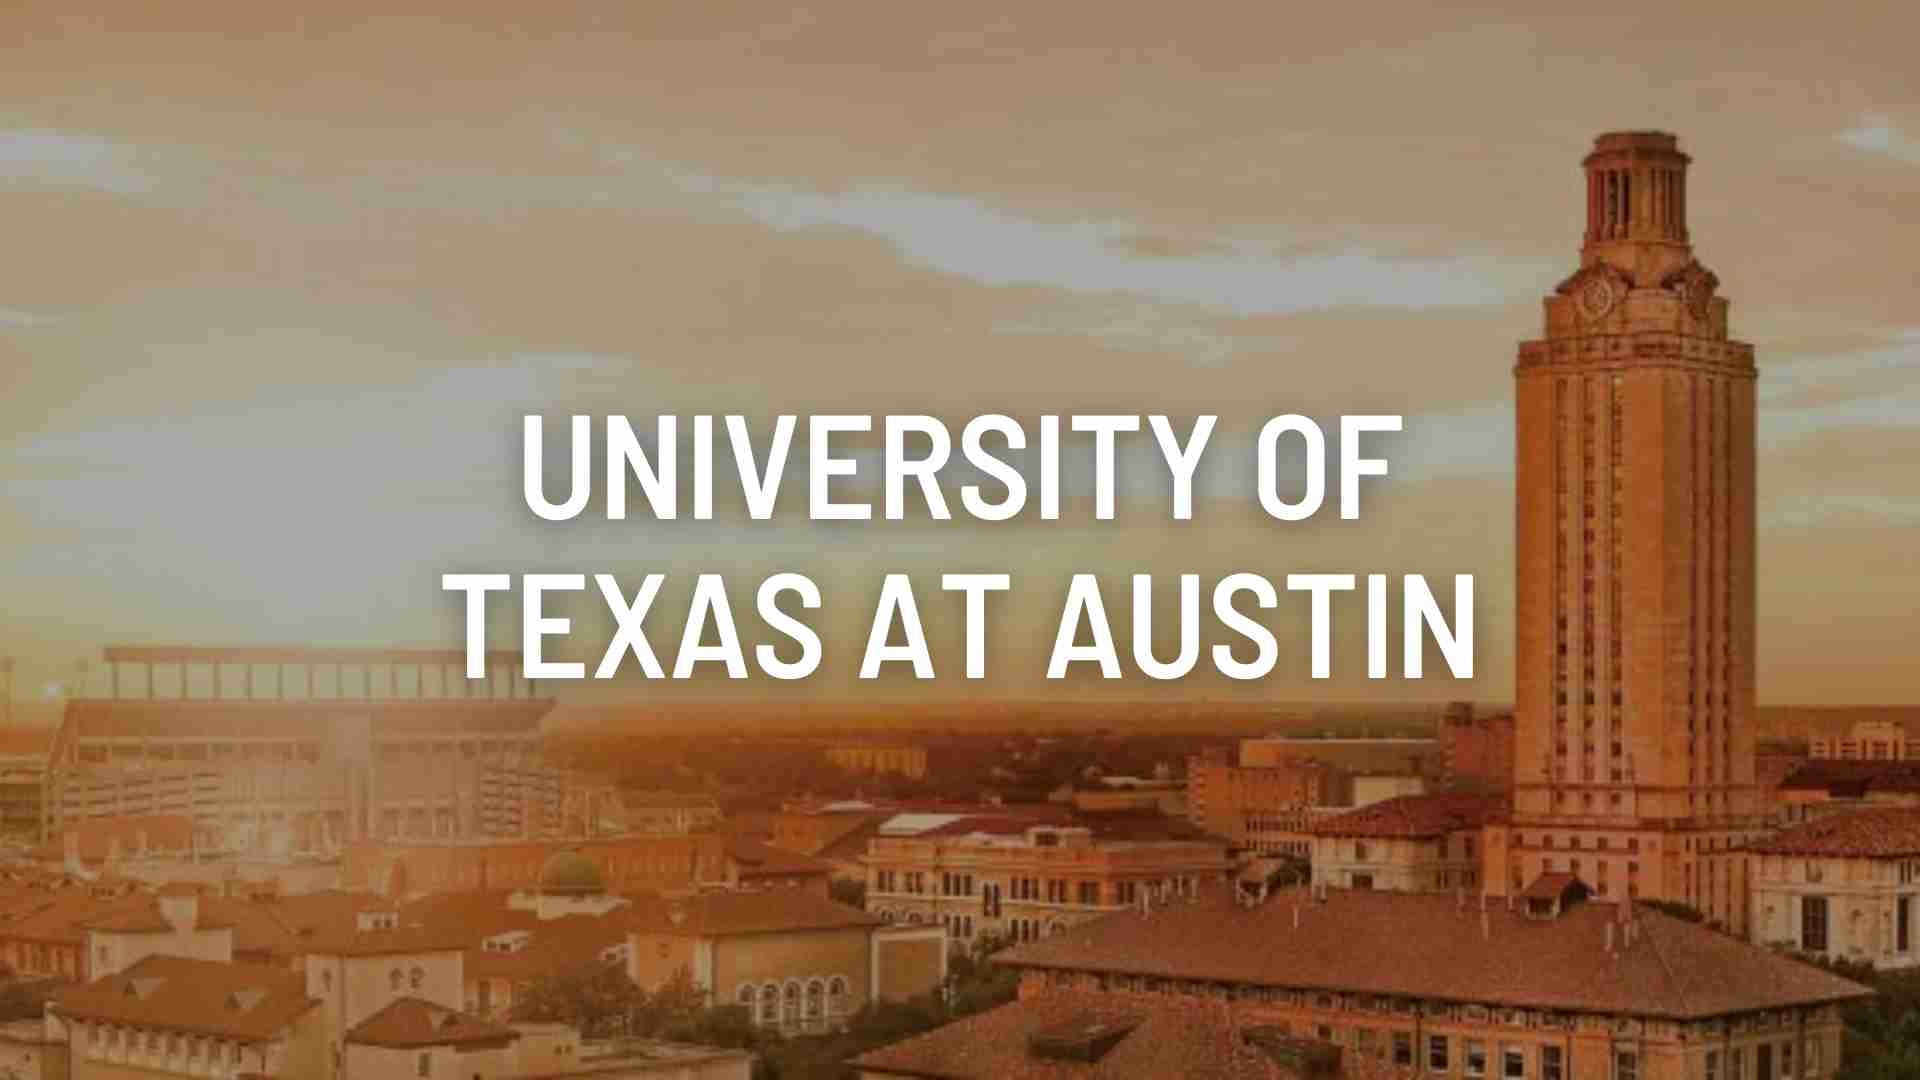 University of Texas at Austin (McCombs School of Business):